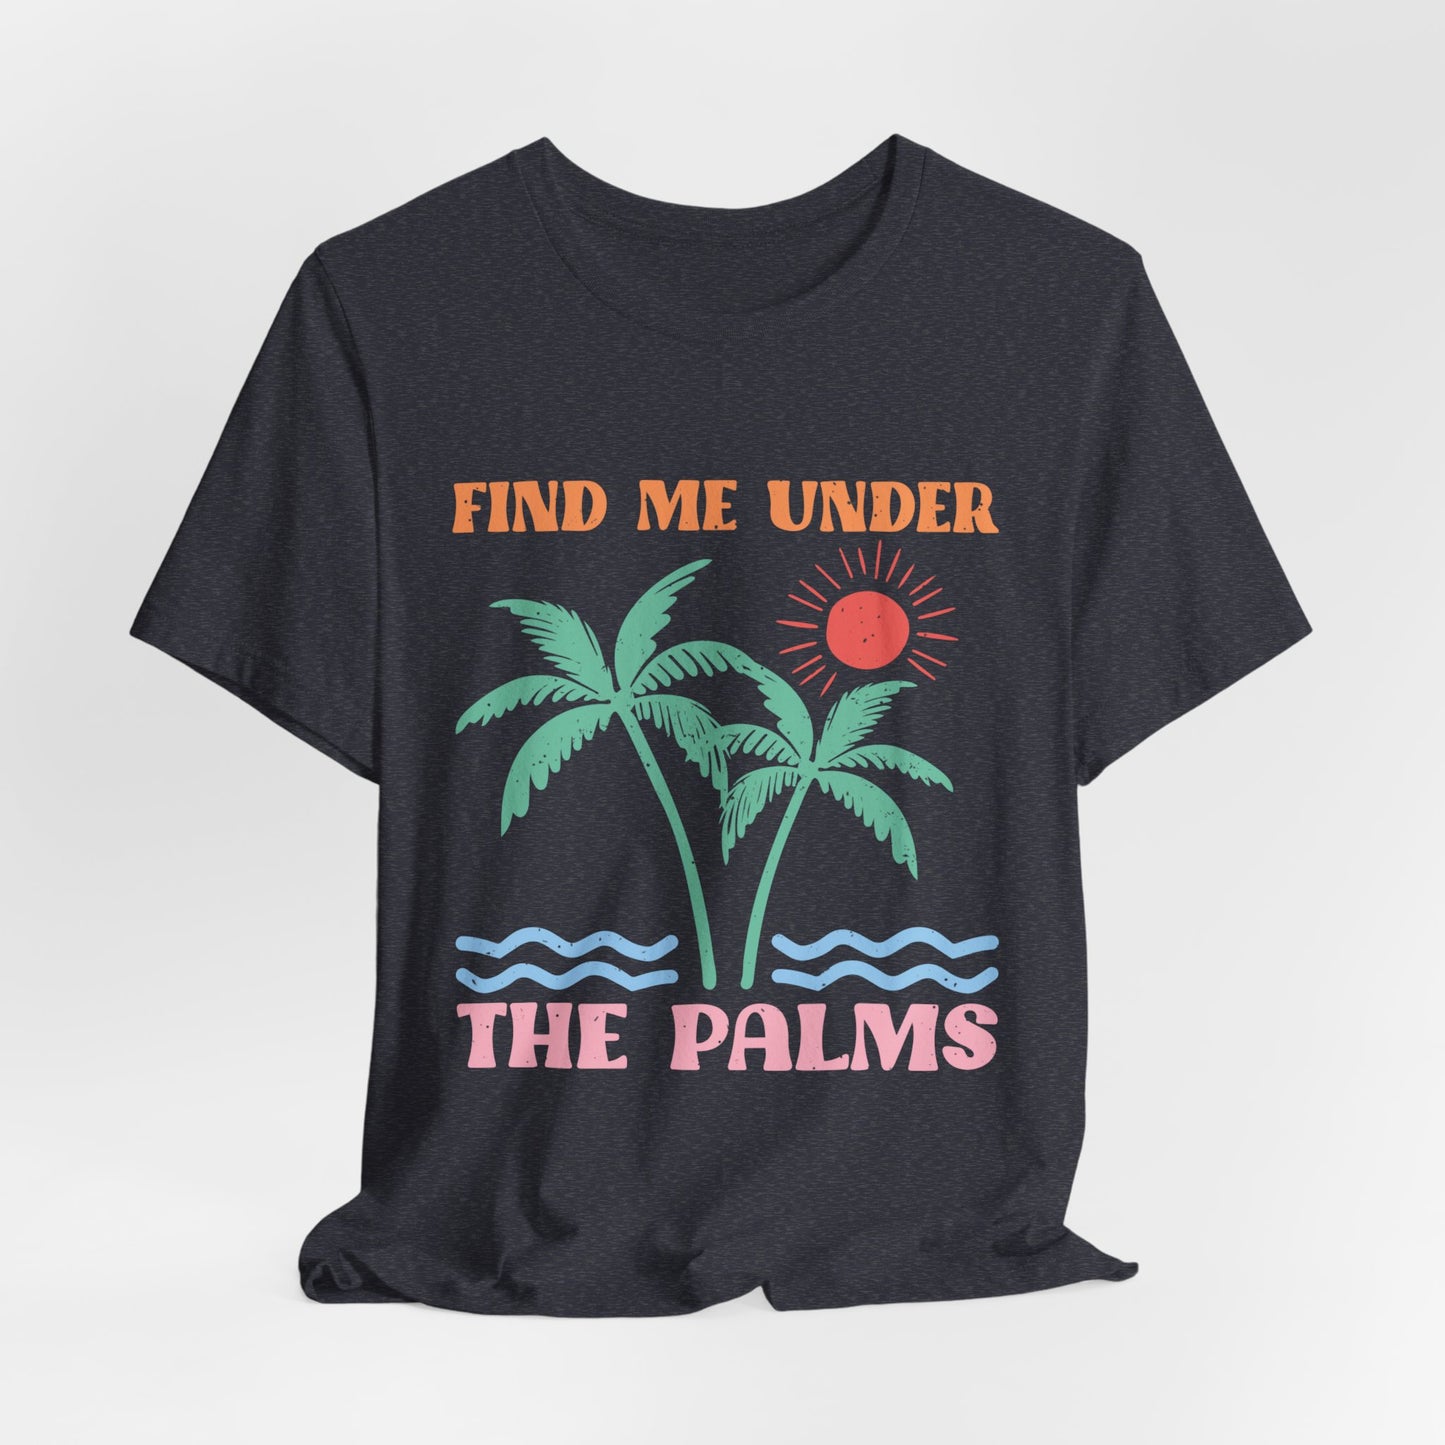 Find Me Under the Palms Women's Short Sleeve Tee